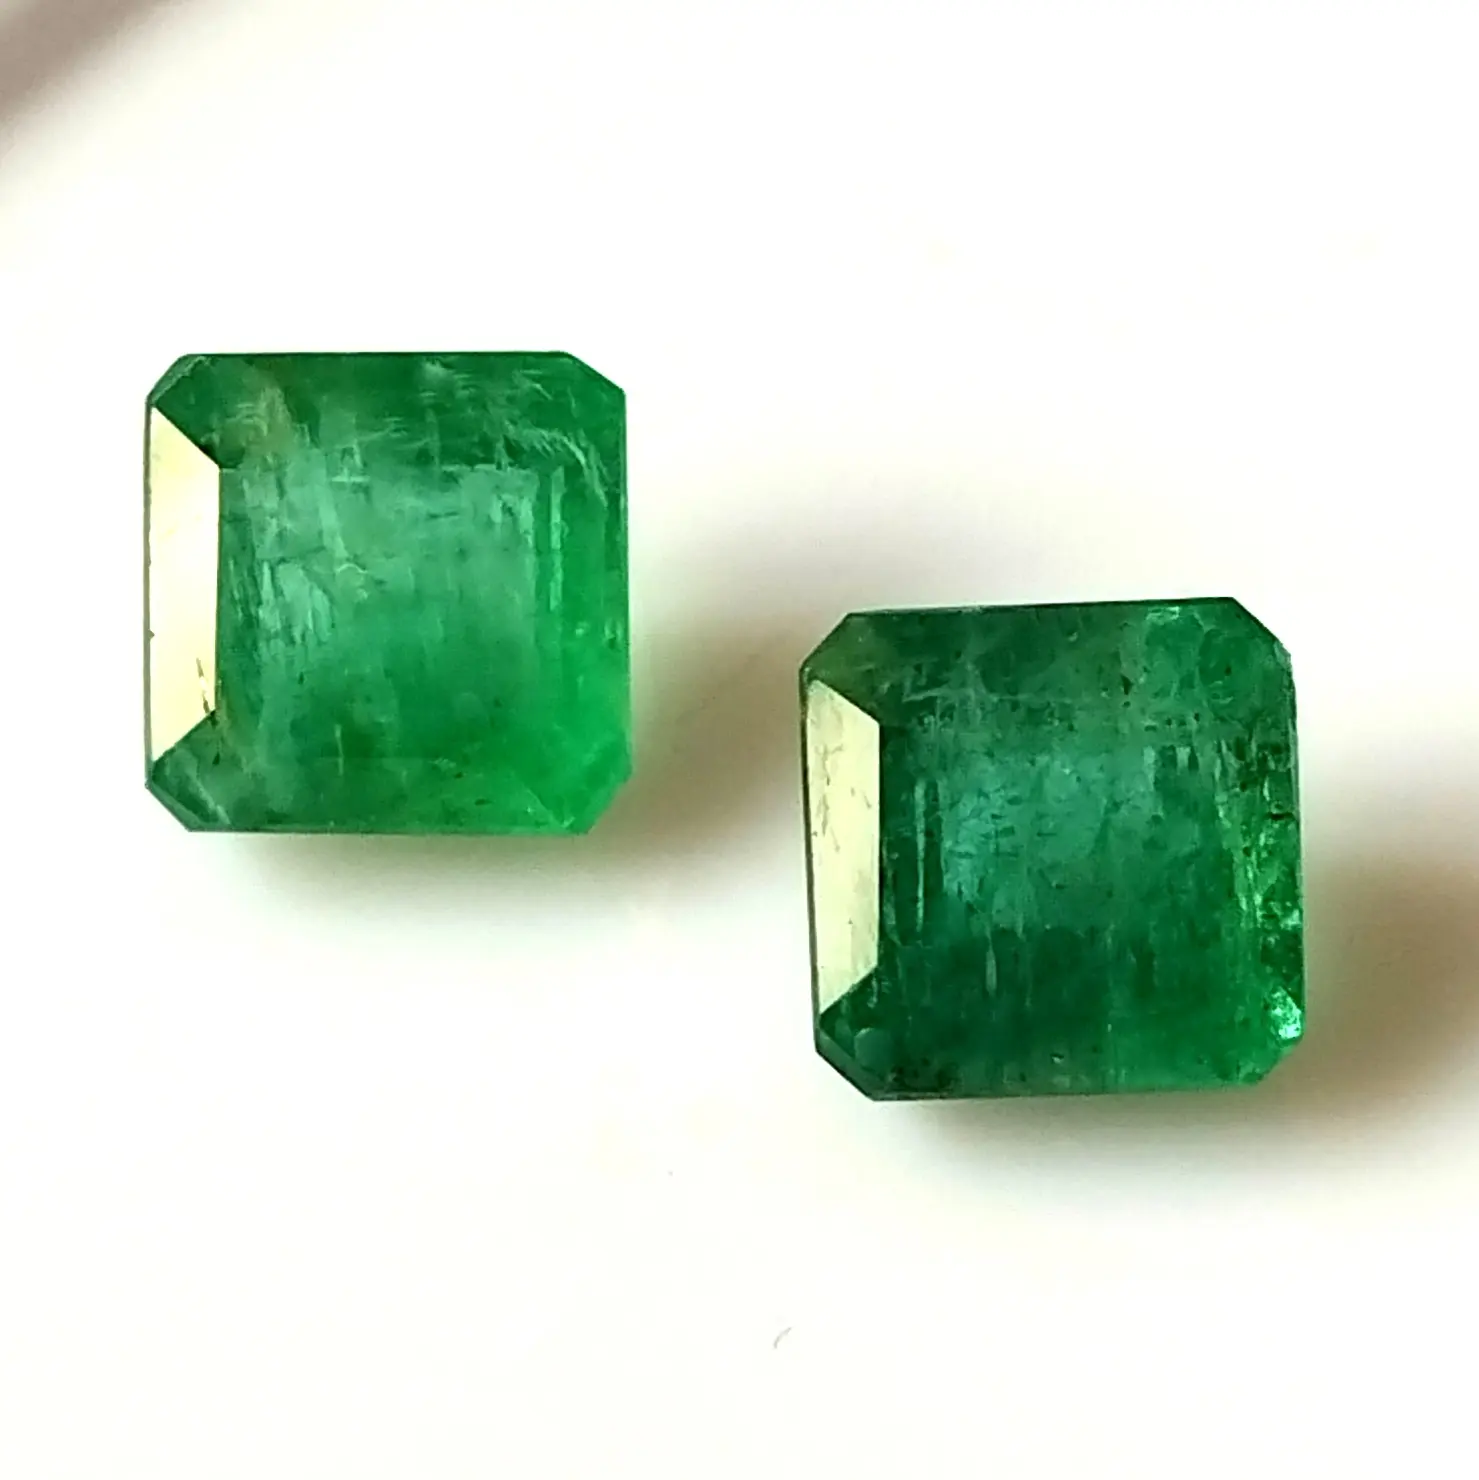 Natural Untreated Faceted Zambian Emerald 5.5 mm Square Octagon Cut Green Color Calibrated Loose Gemstone AAA+ quality stone